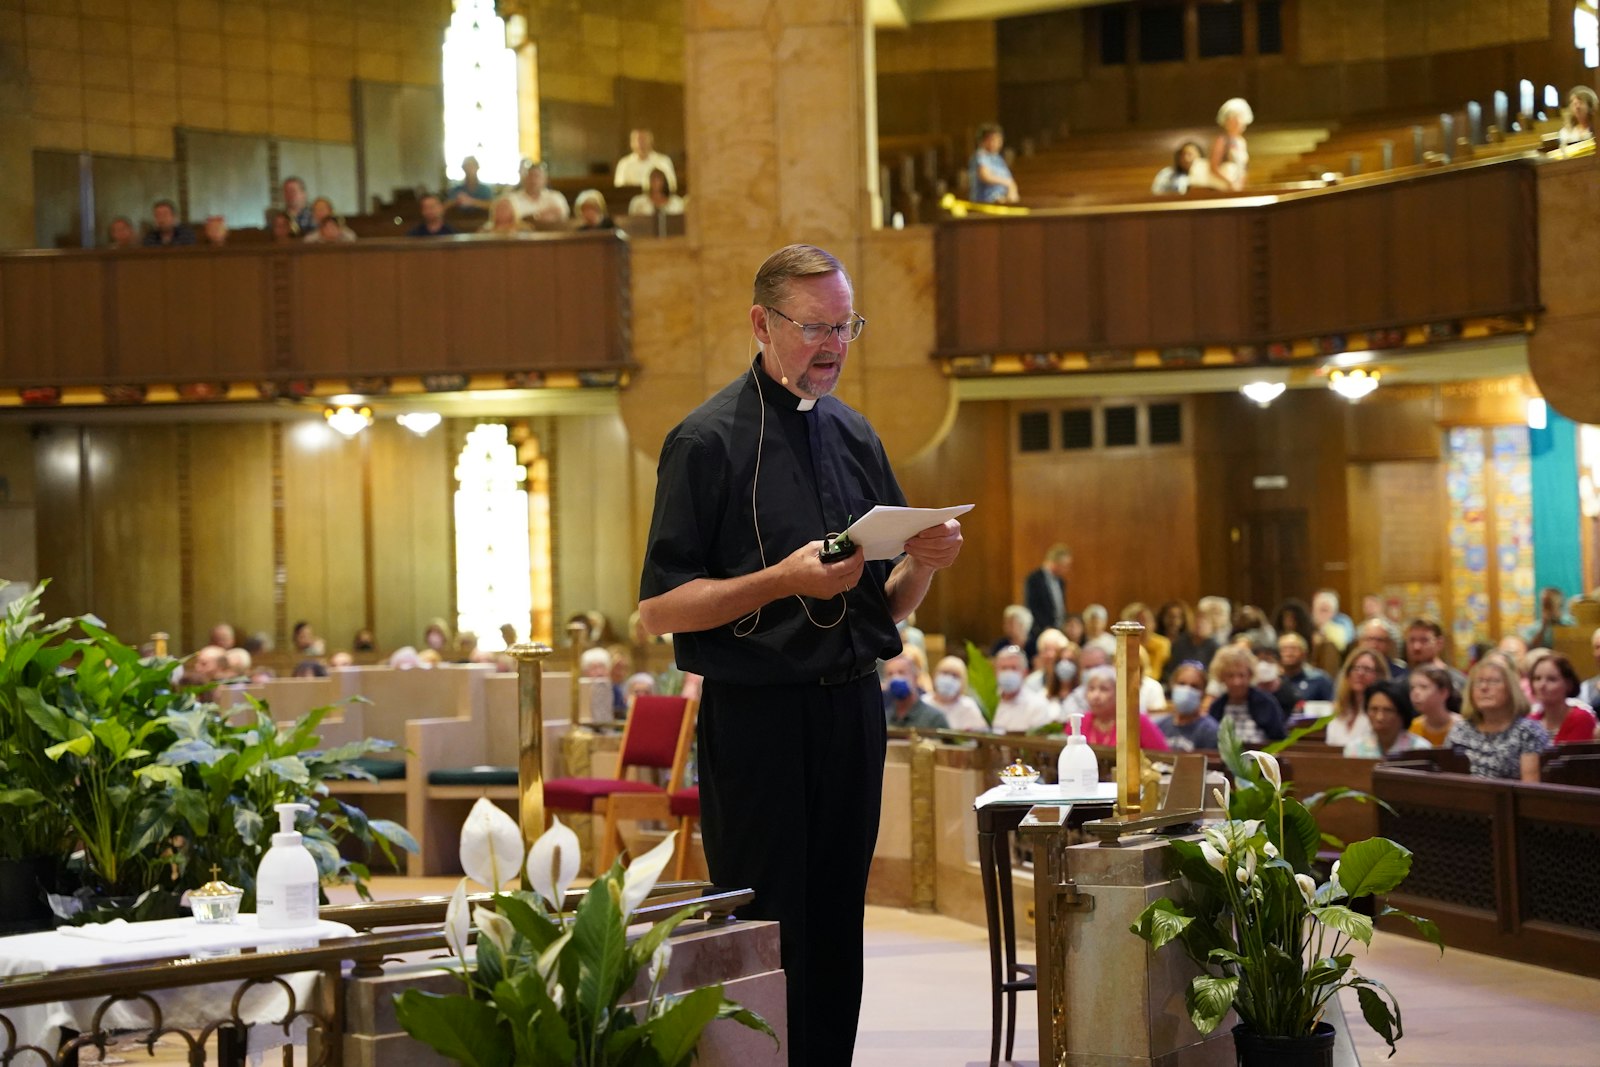 Fr. Joe Horn, rector of National Shrine of the Little Flower Basilica, introduced Bishop Robert Barron to the audience during the “Live of the Basilica” event. Fr. Horn himself received an ovation for recently returning to the parish after dealing with health issues.